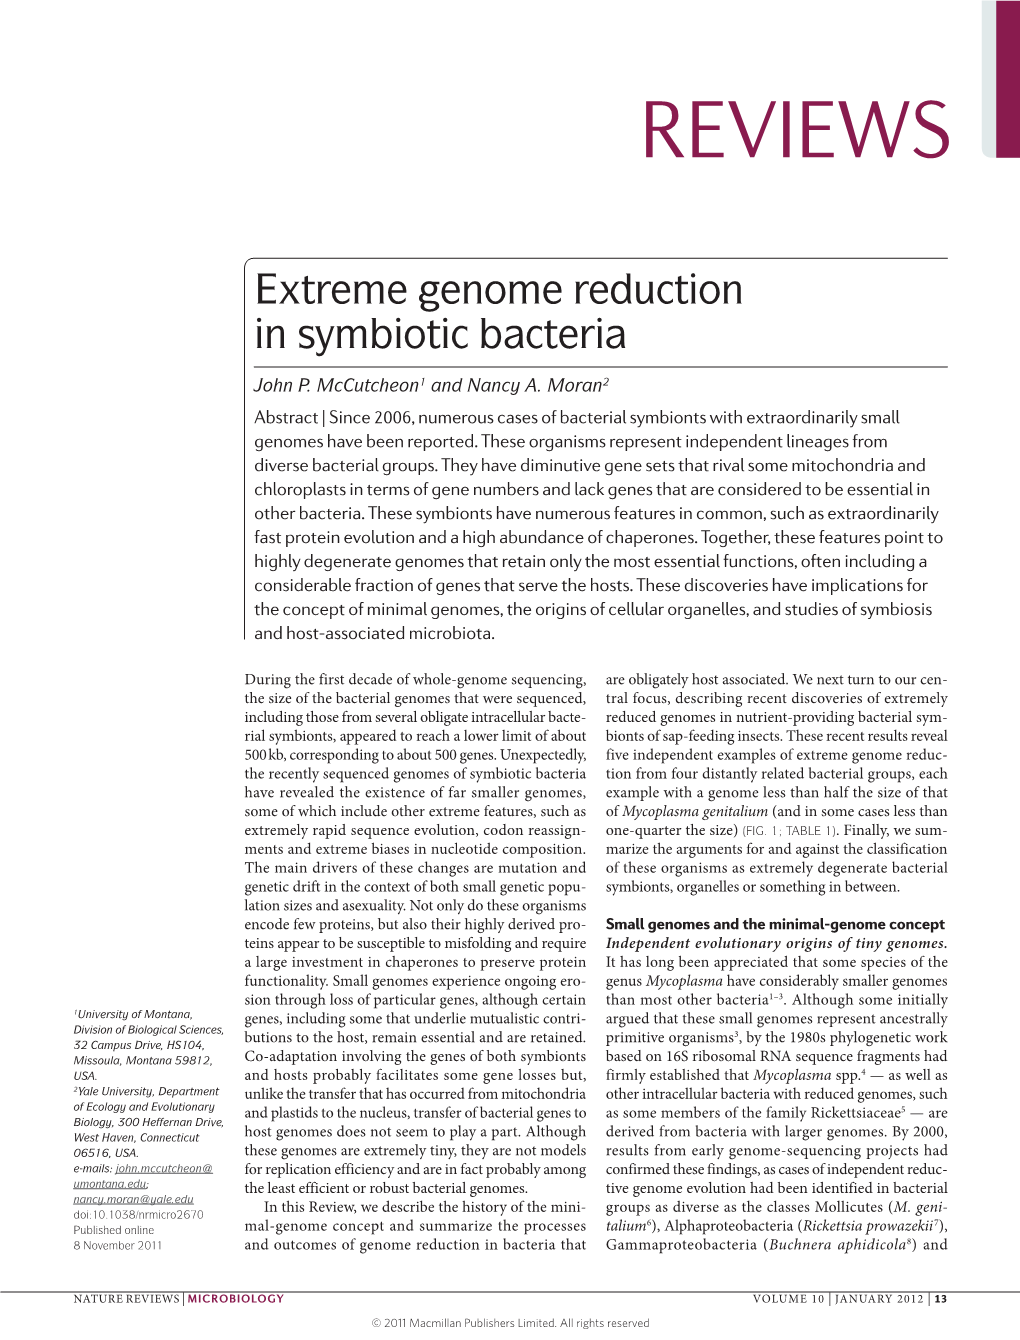 Extreme Genome Reduction in Symbiotic Bacteria